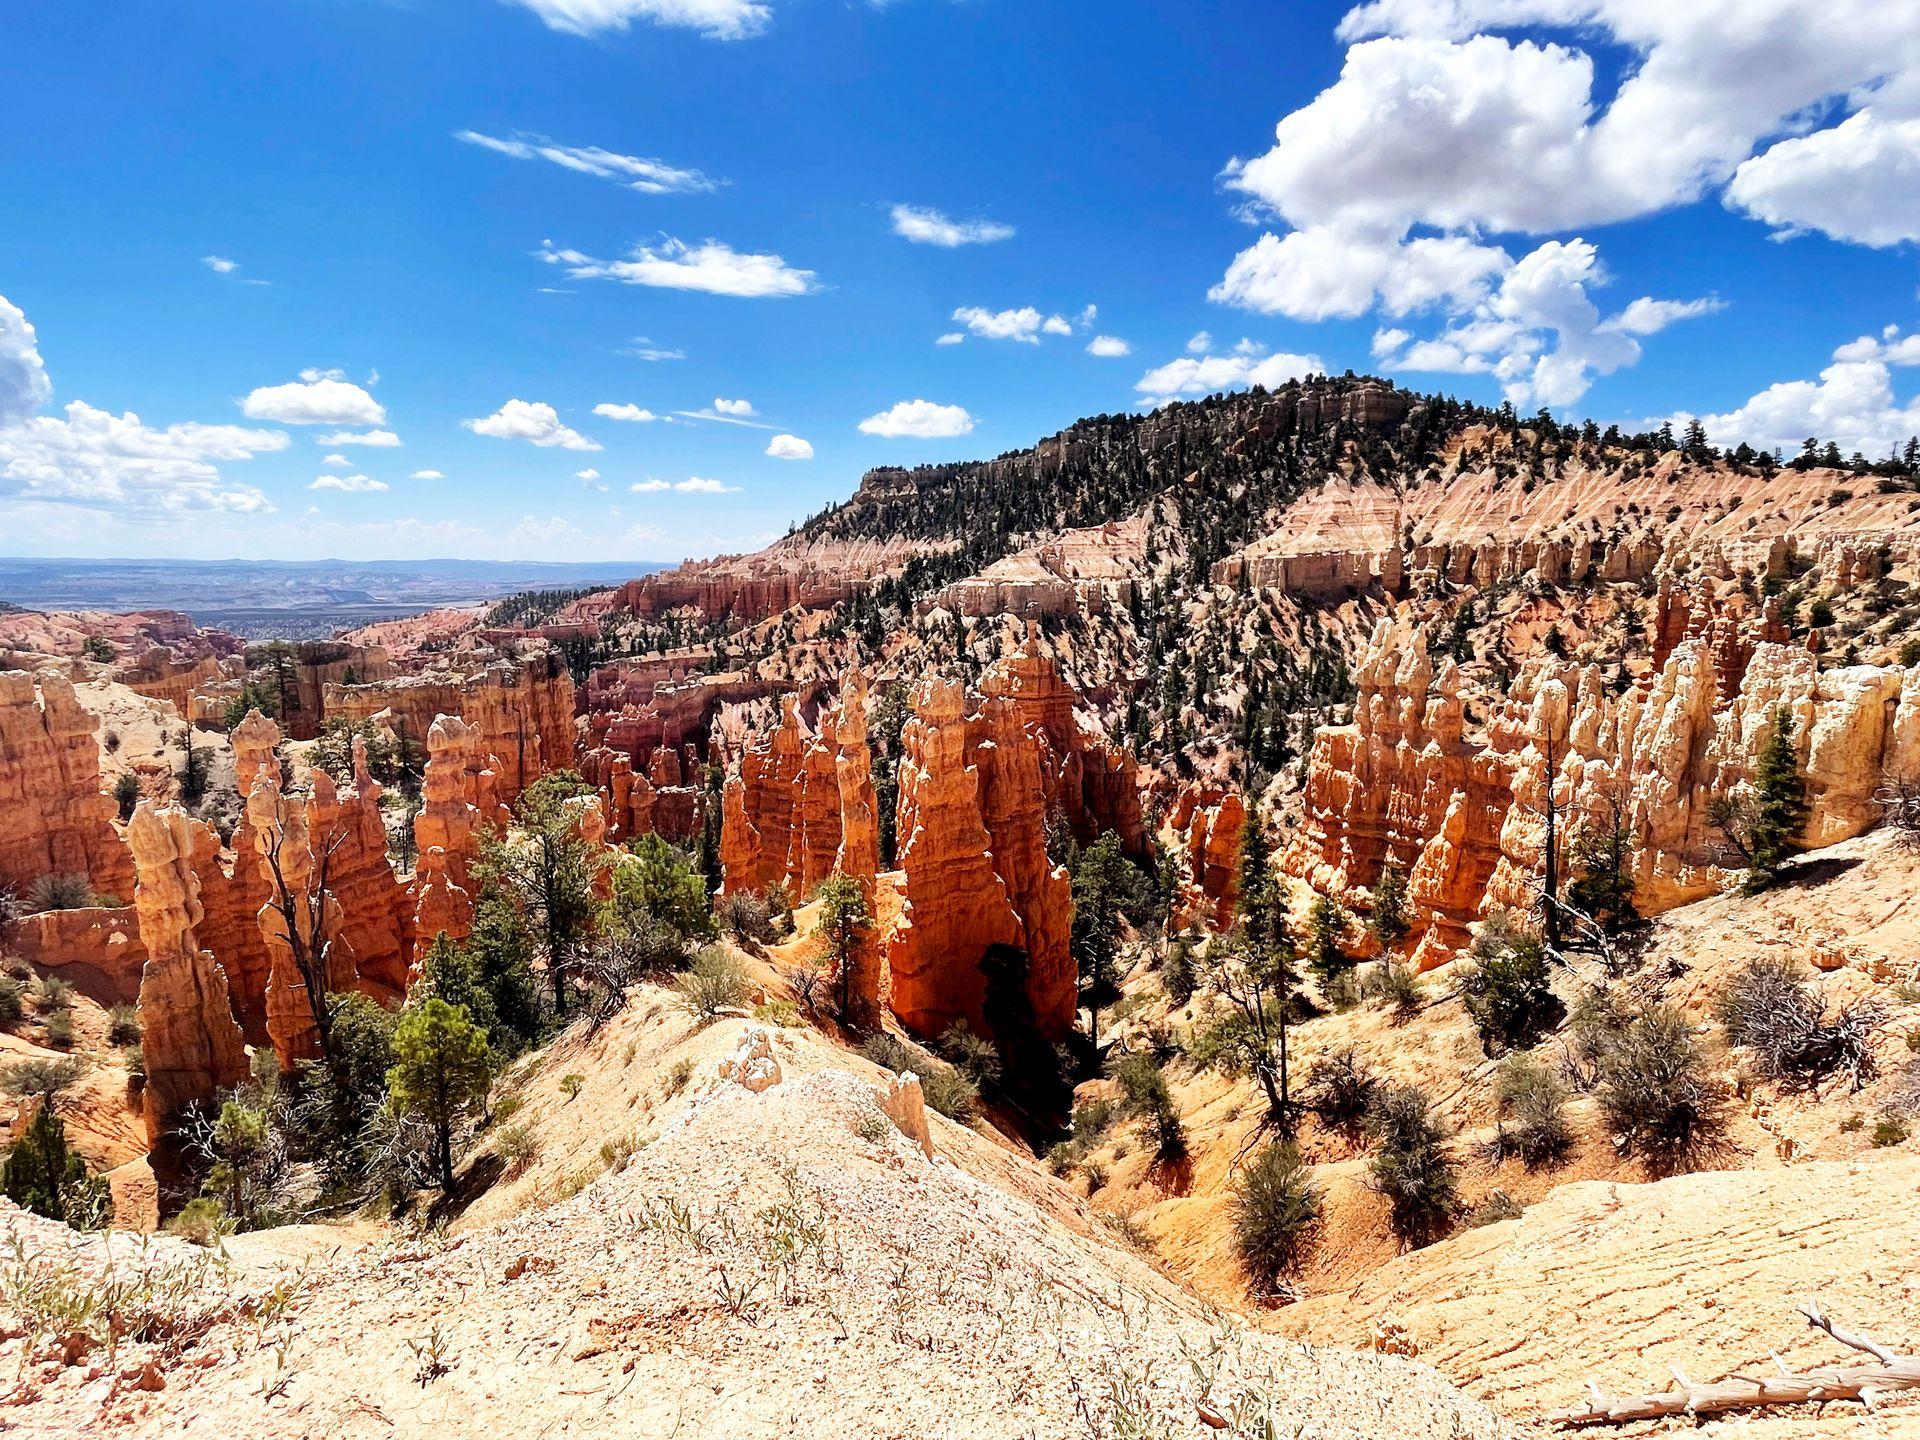 A view of orange hoodoos from the Fairyland Loop in Bryce Canyon National Park.